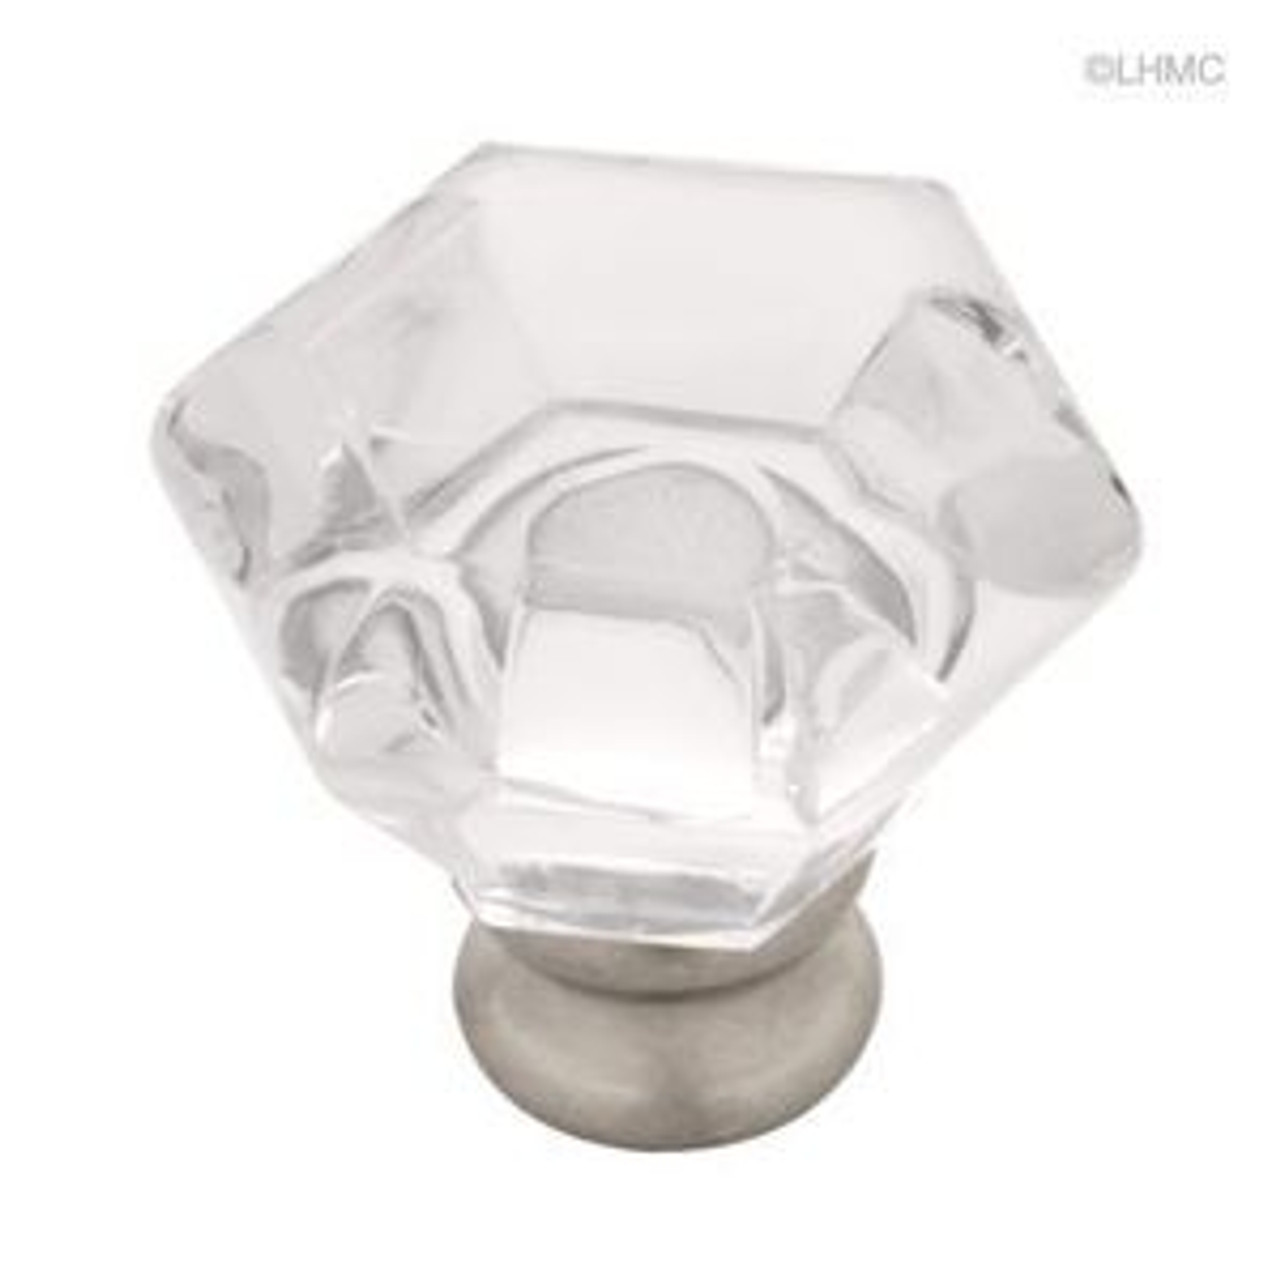 P15573-116  1 1/4" Clear Acrylic Satin Nickel Cabinet Drawer Knob  2 Pack